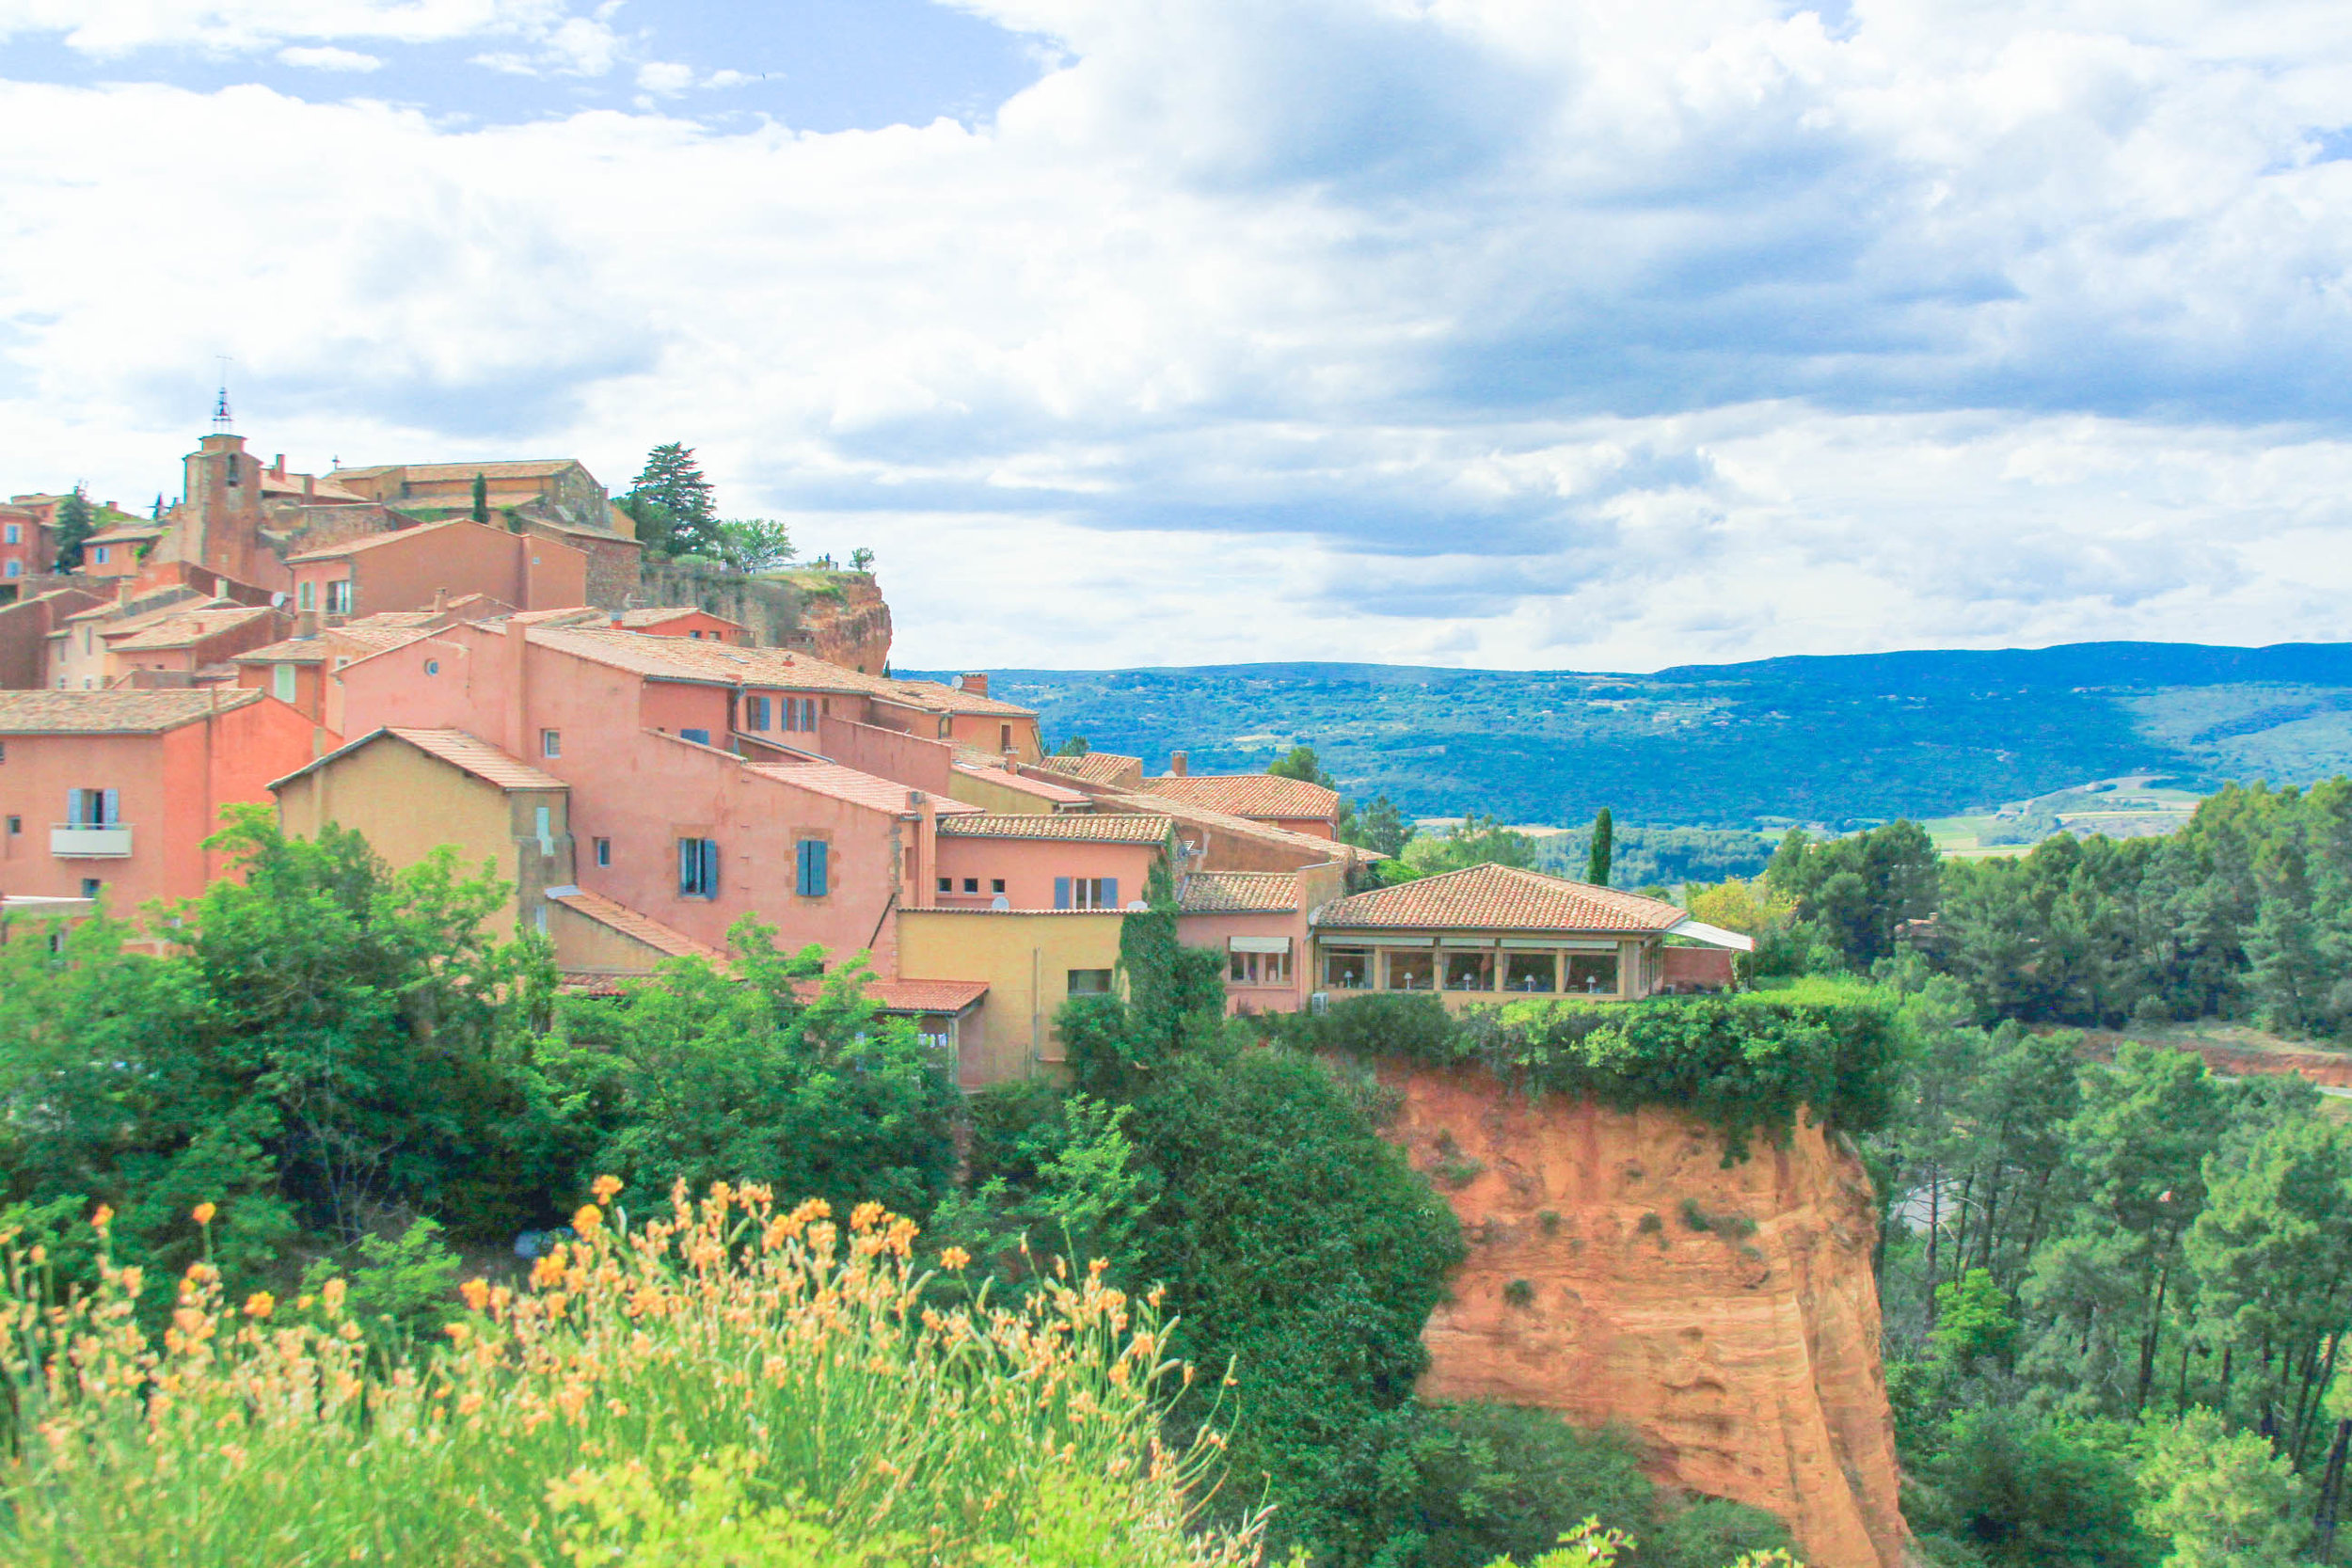 "Roussillon, France is built on top of a striking red-ochre cliff...." | #mfrancisdesigntravels